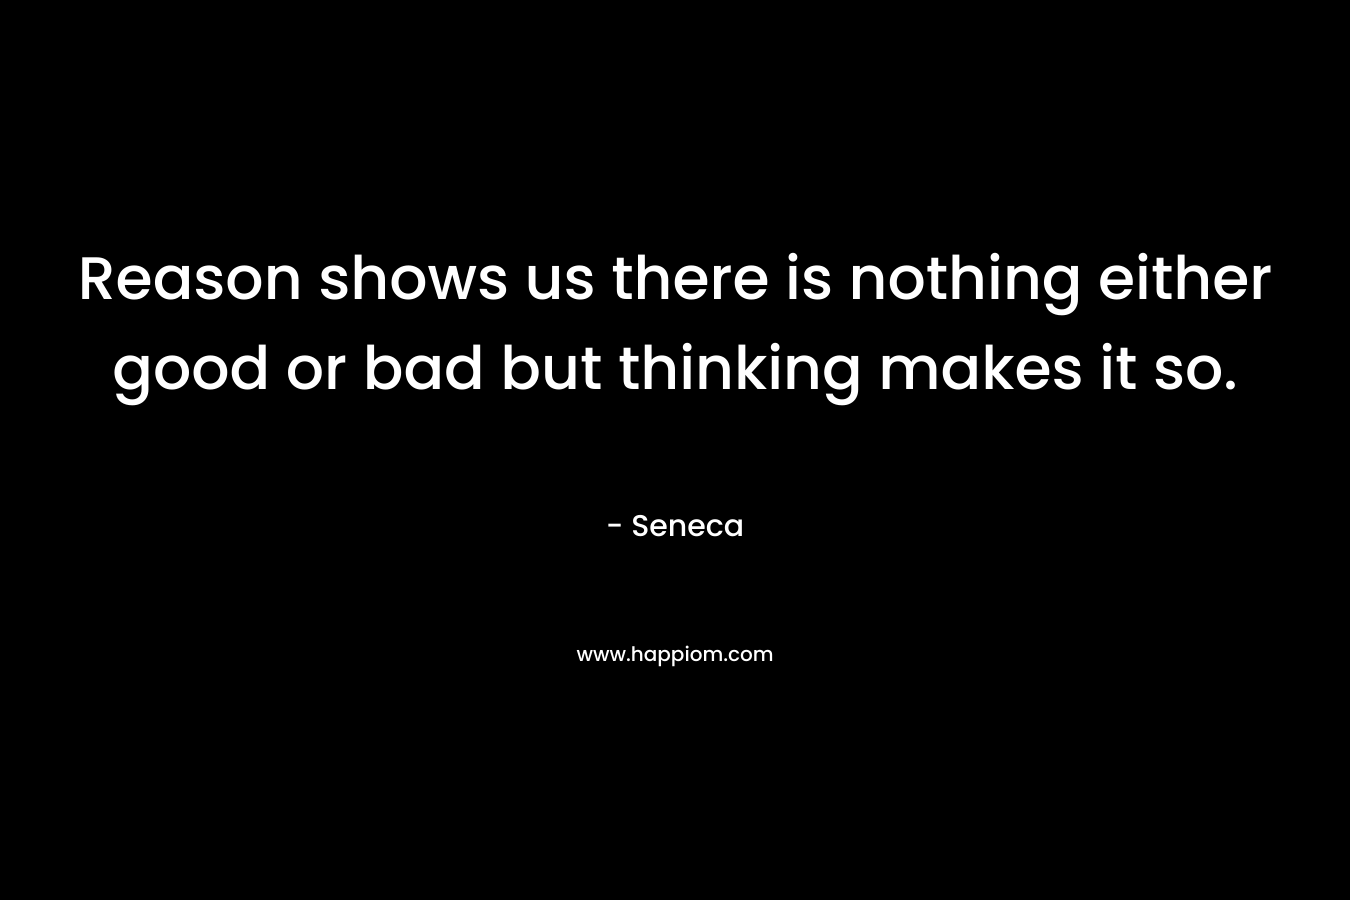 Reason shows us there is nothing either good or bad but thinking makes it so. – Seneca